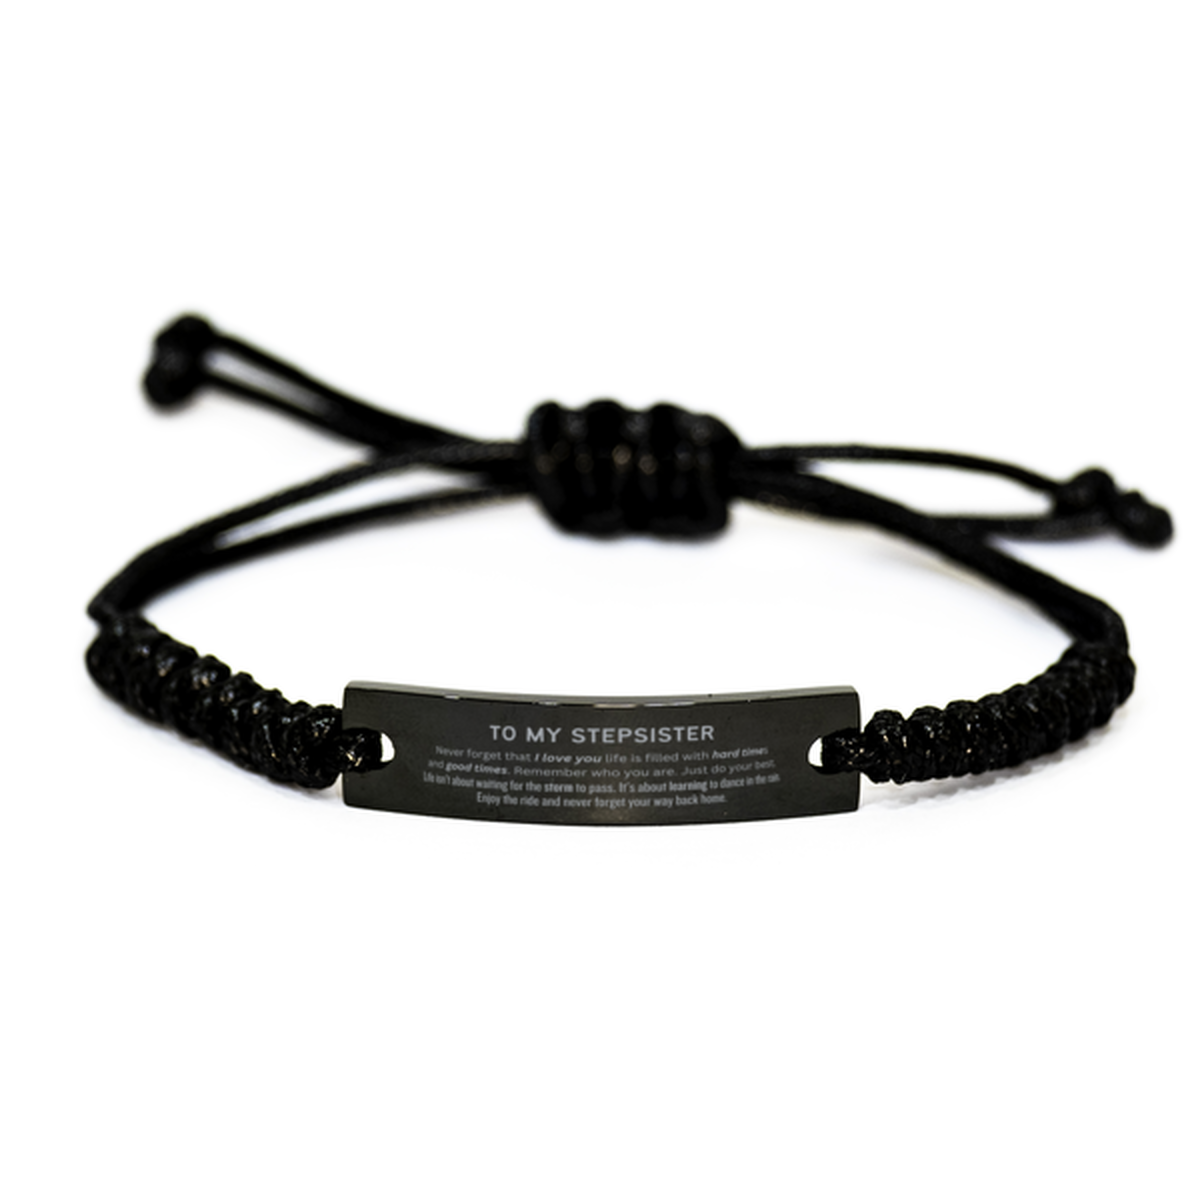 Christmas Stepsister Black Rope Bracelet Gifts, To My Stepsister Birthday Thank You Gifts For Stepsister, Graduation Unique Gifts For Stepsister To My Stepsister Never forget that I love you life is filled with hard times and good times. Remember who you